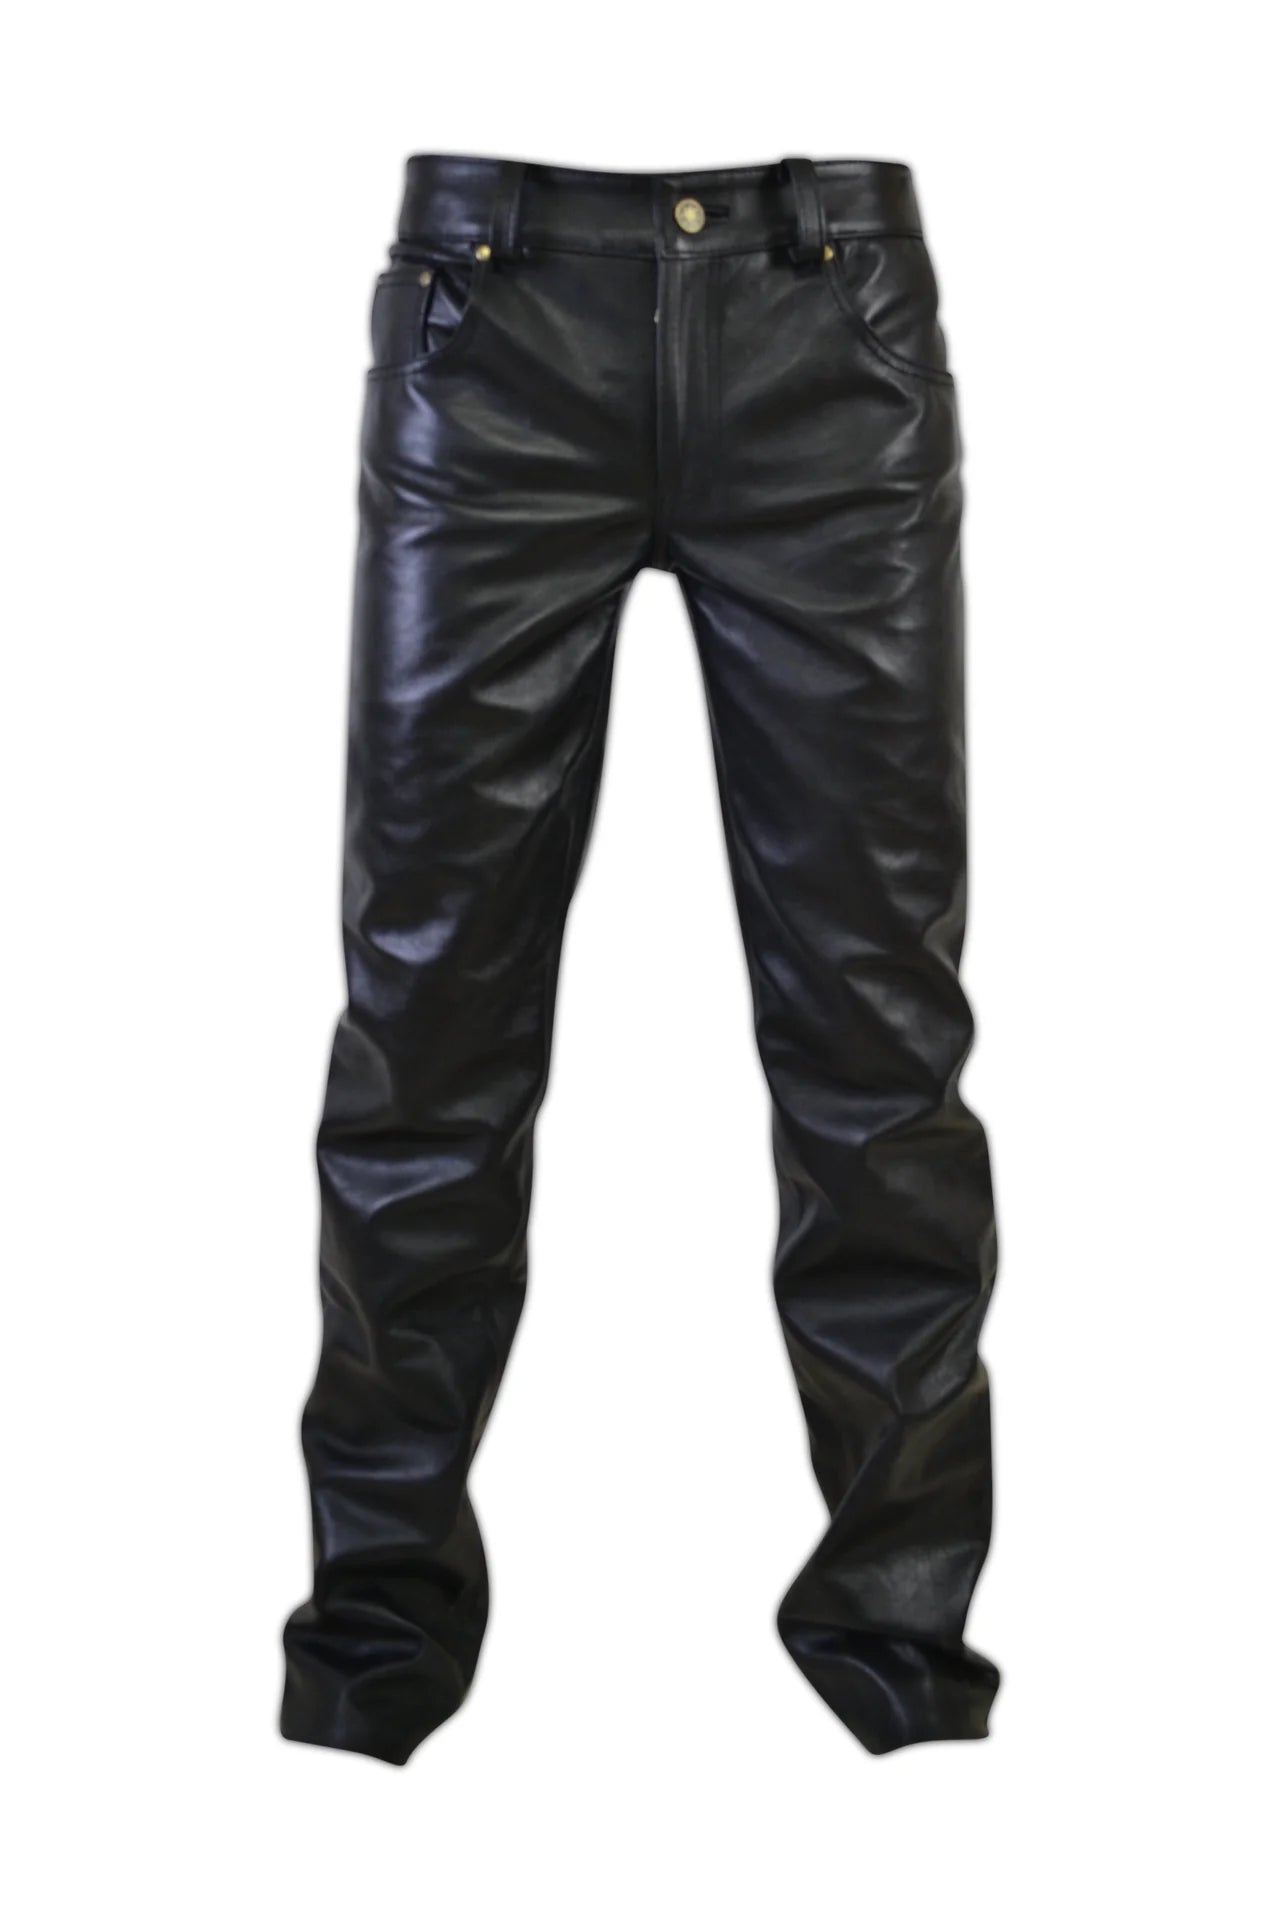 Jeans Style Leather Pant With 5 Pockets - PINESMAX